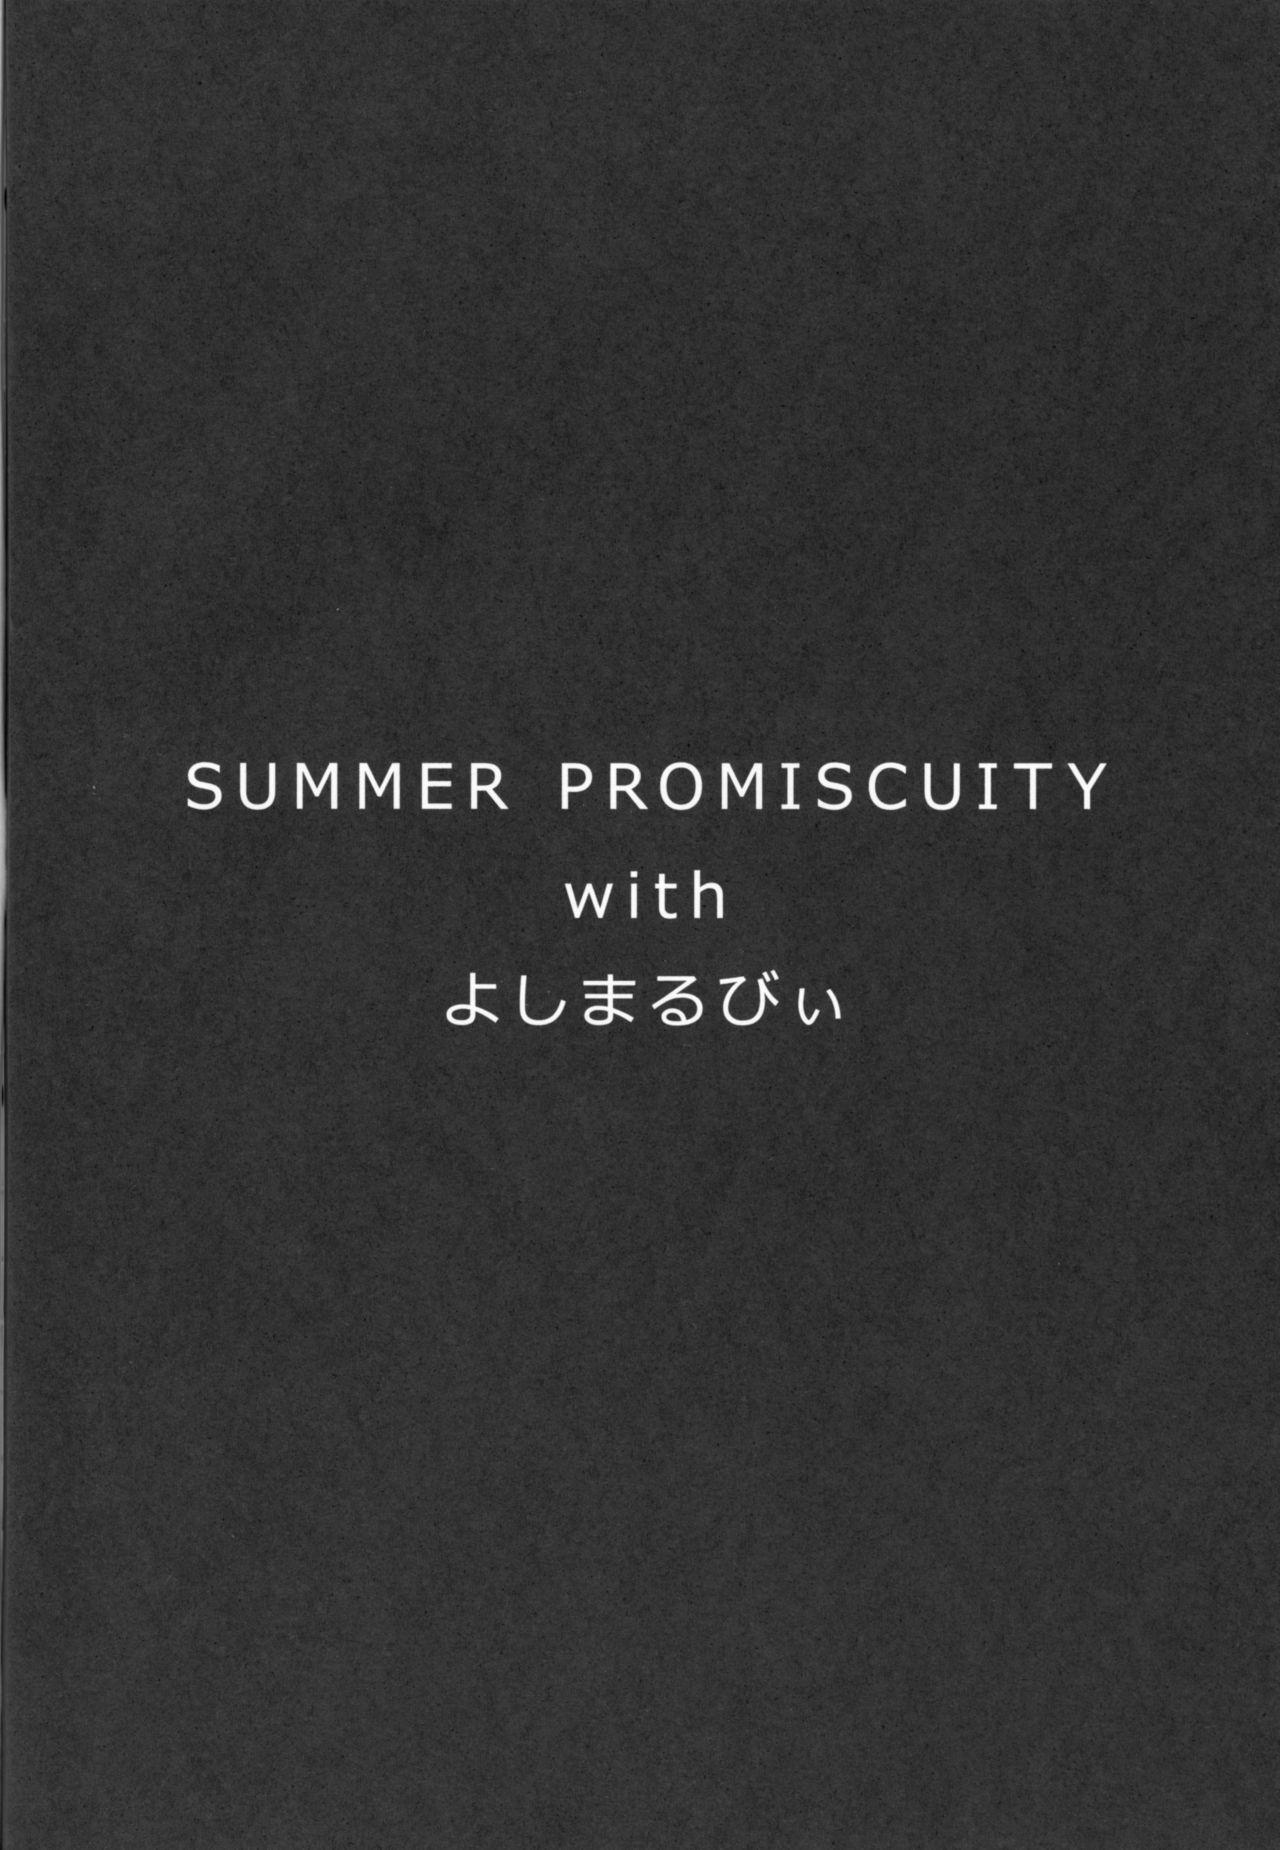 SUMMER PROMISCUITY with Yoshimaruby 3